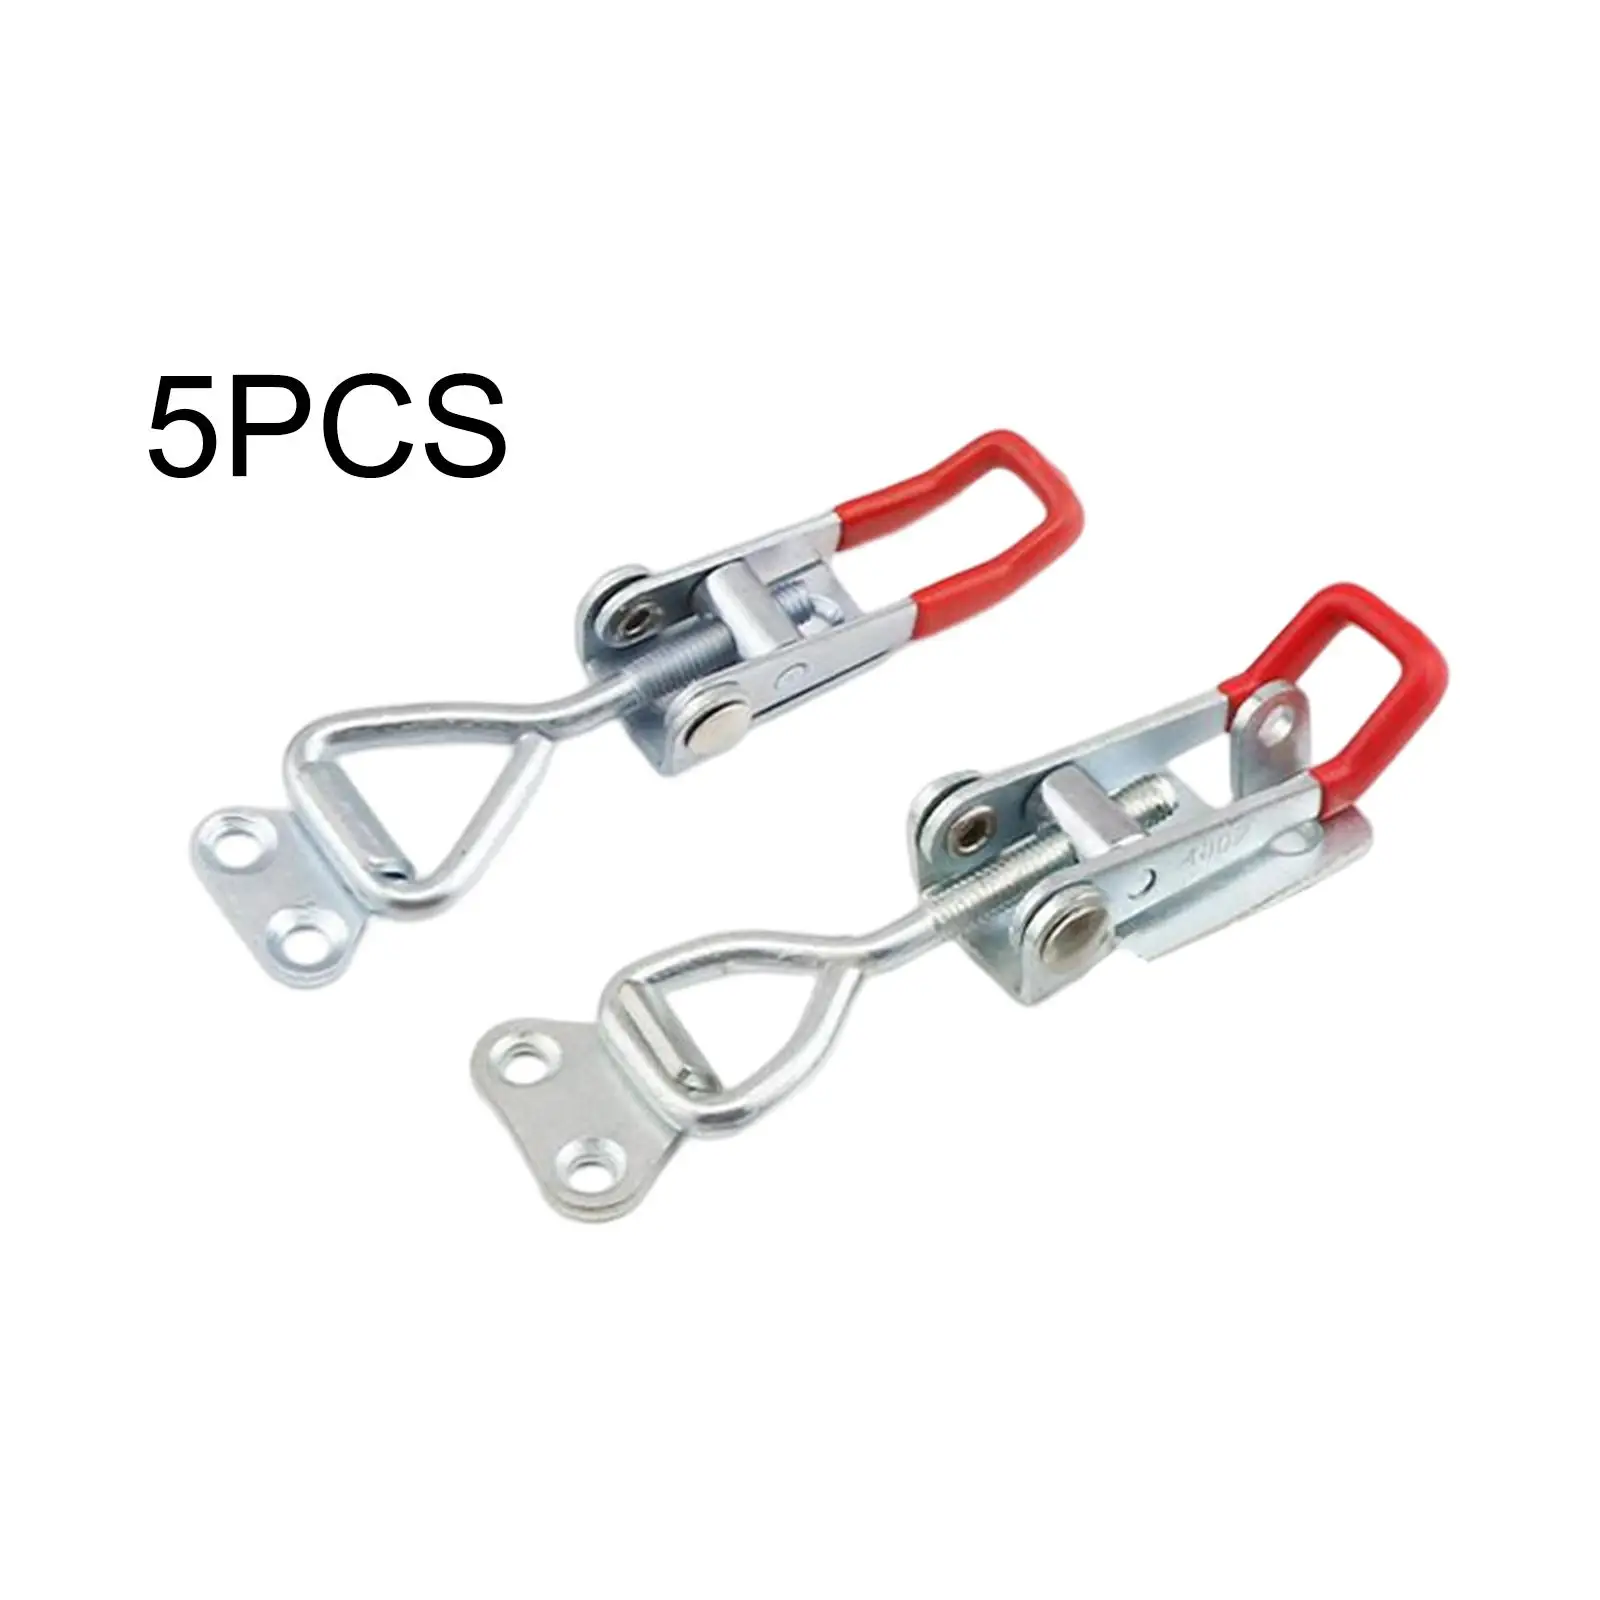 5 Pieces Toggle Clamp Iron Toggle Clamp for Storage Locker DIY